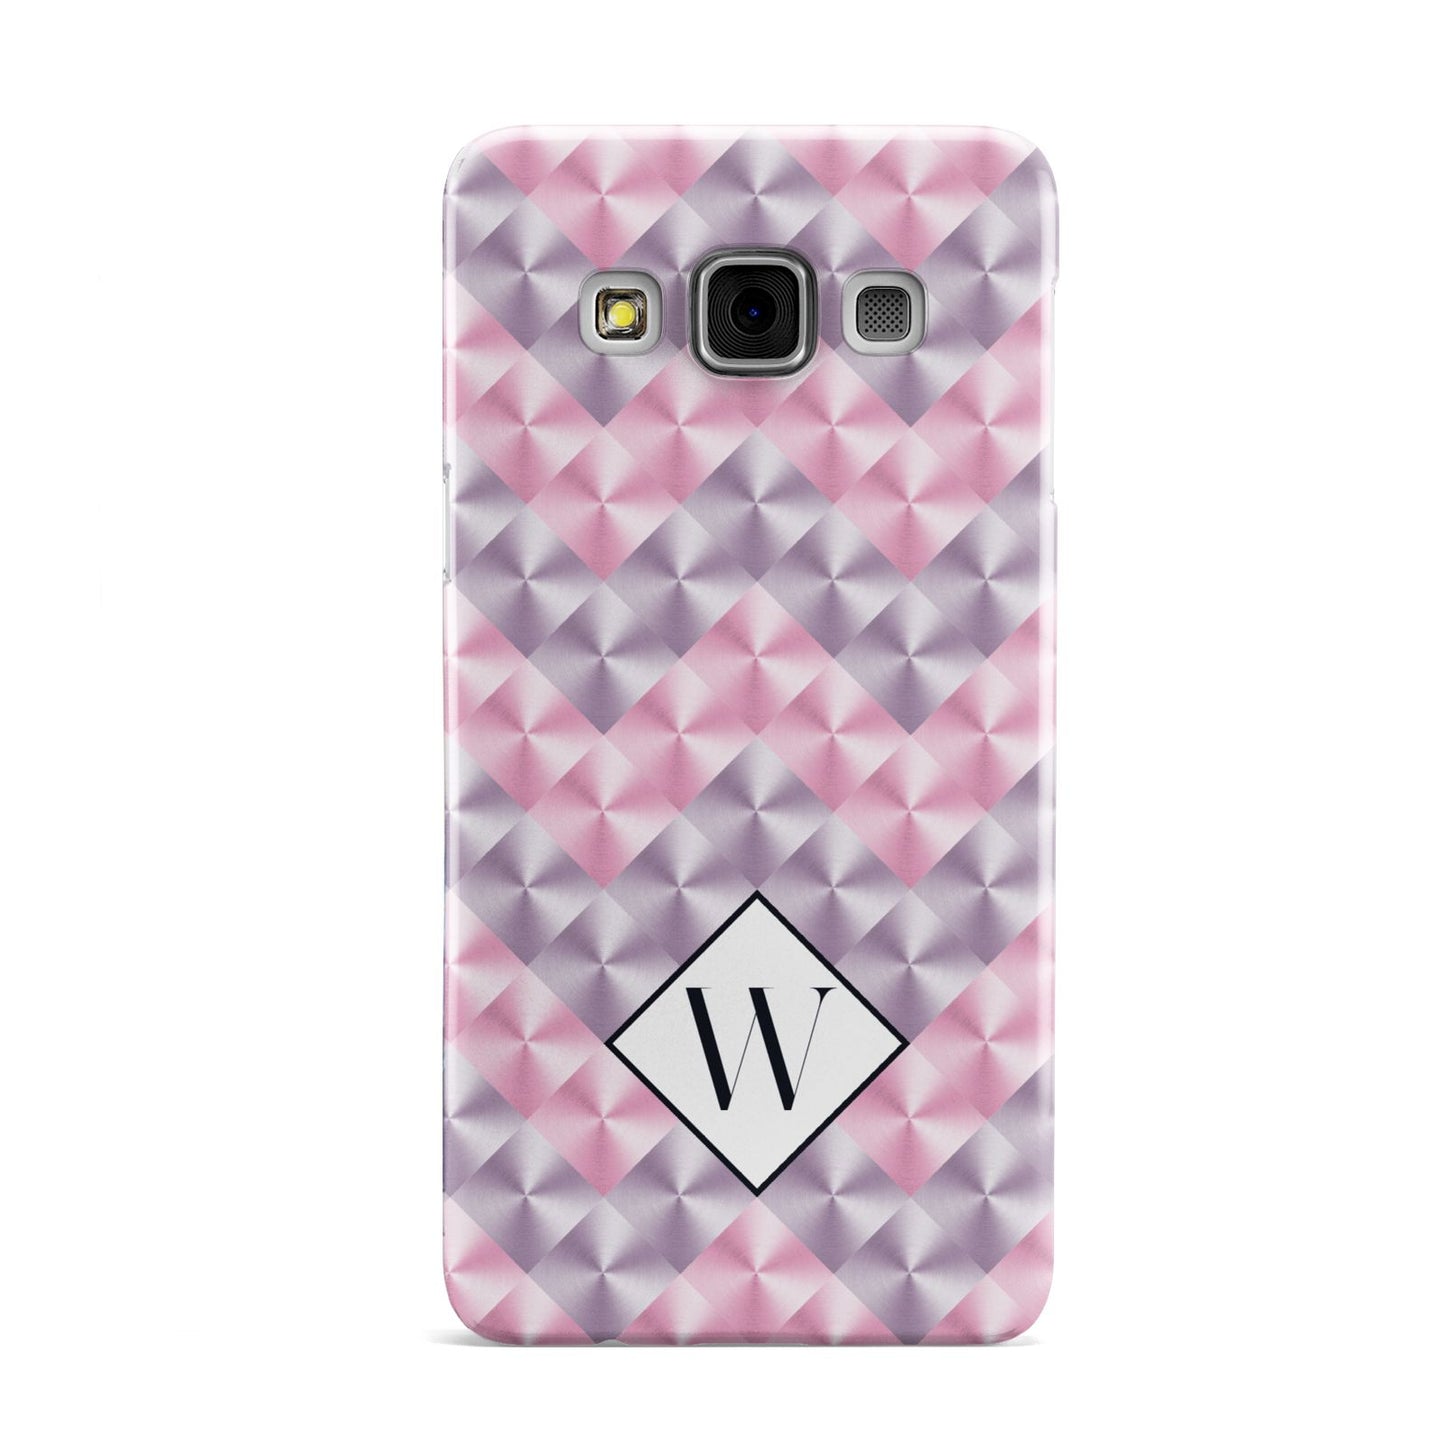 Personalised Mother Of Pearl Monogram Letter Samsung Galaxy A3 Case